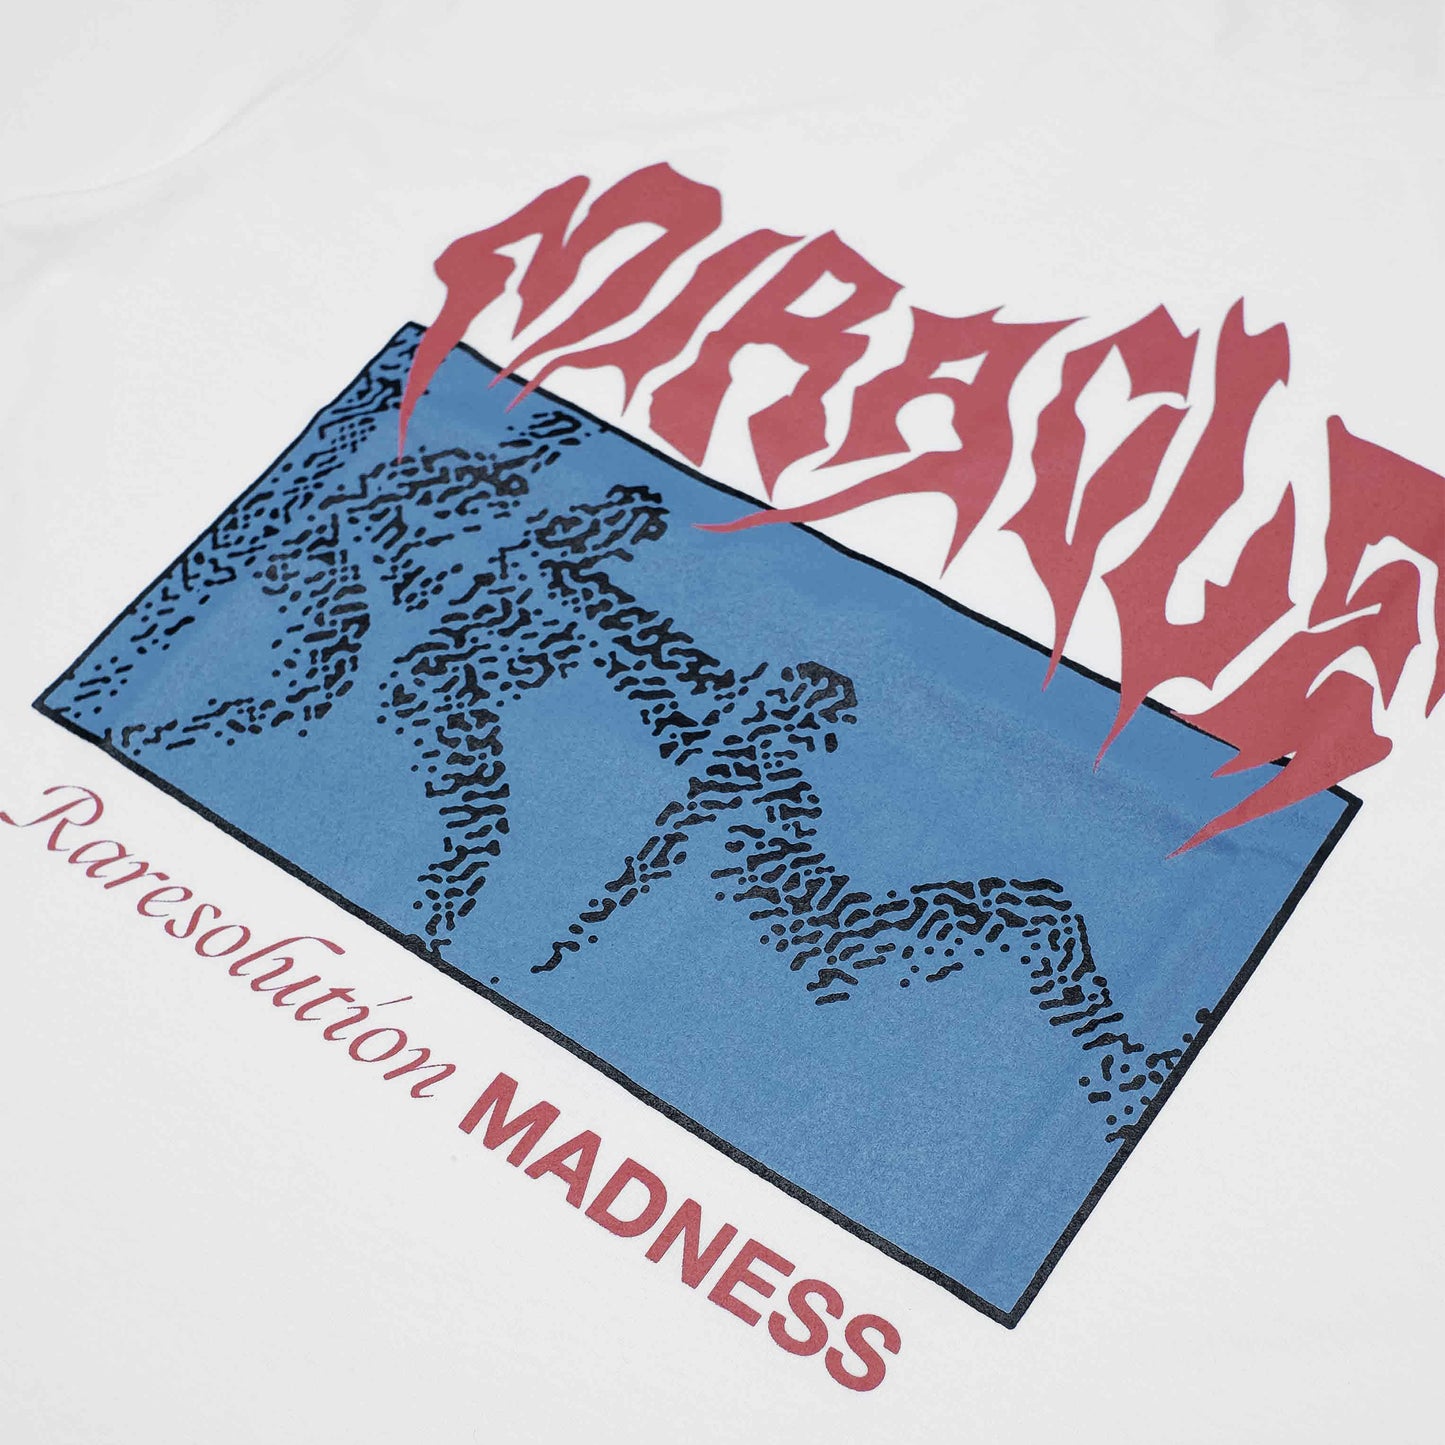 Miracle Mates - Fracture White Oversized T Shirt